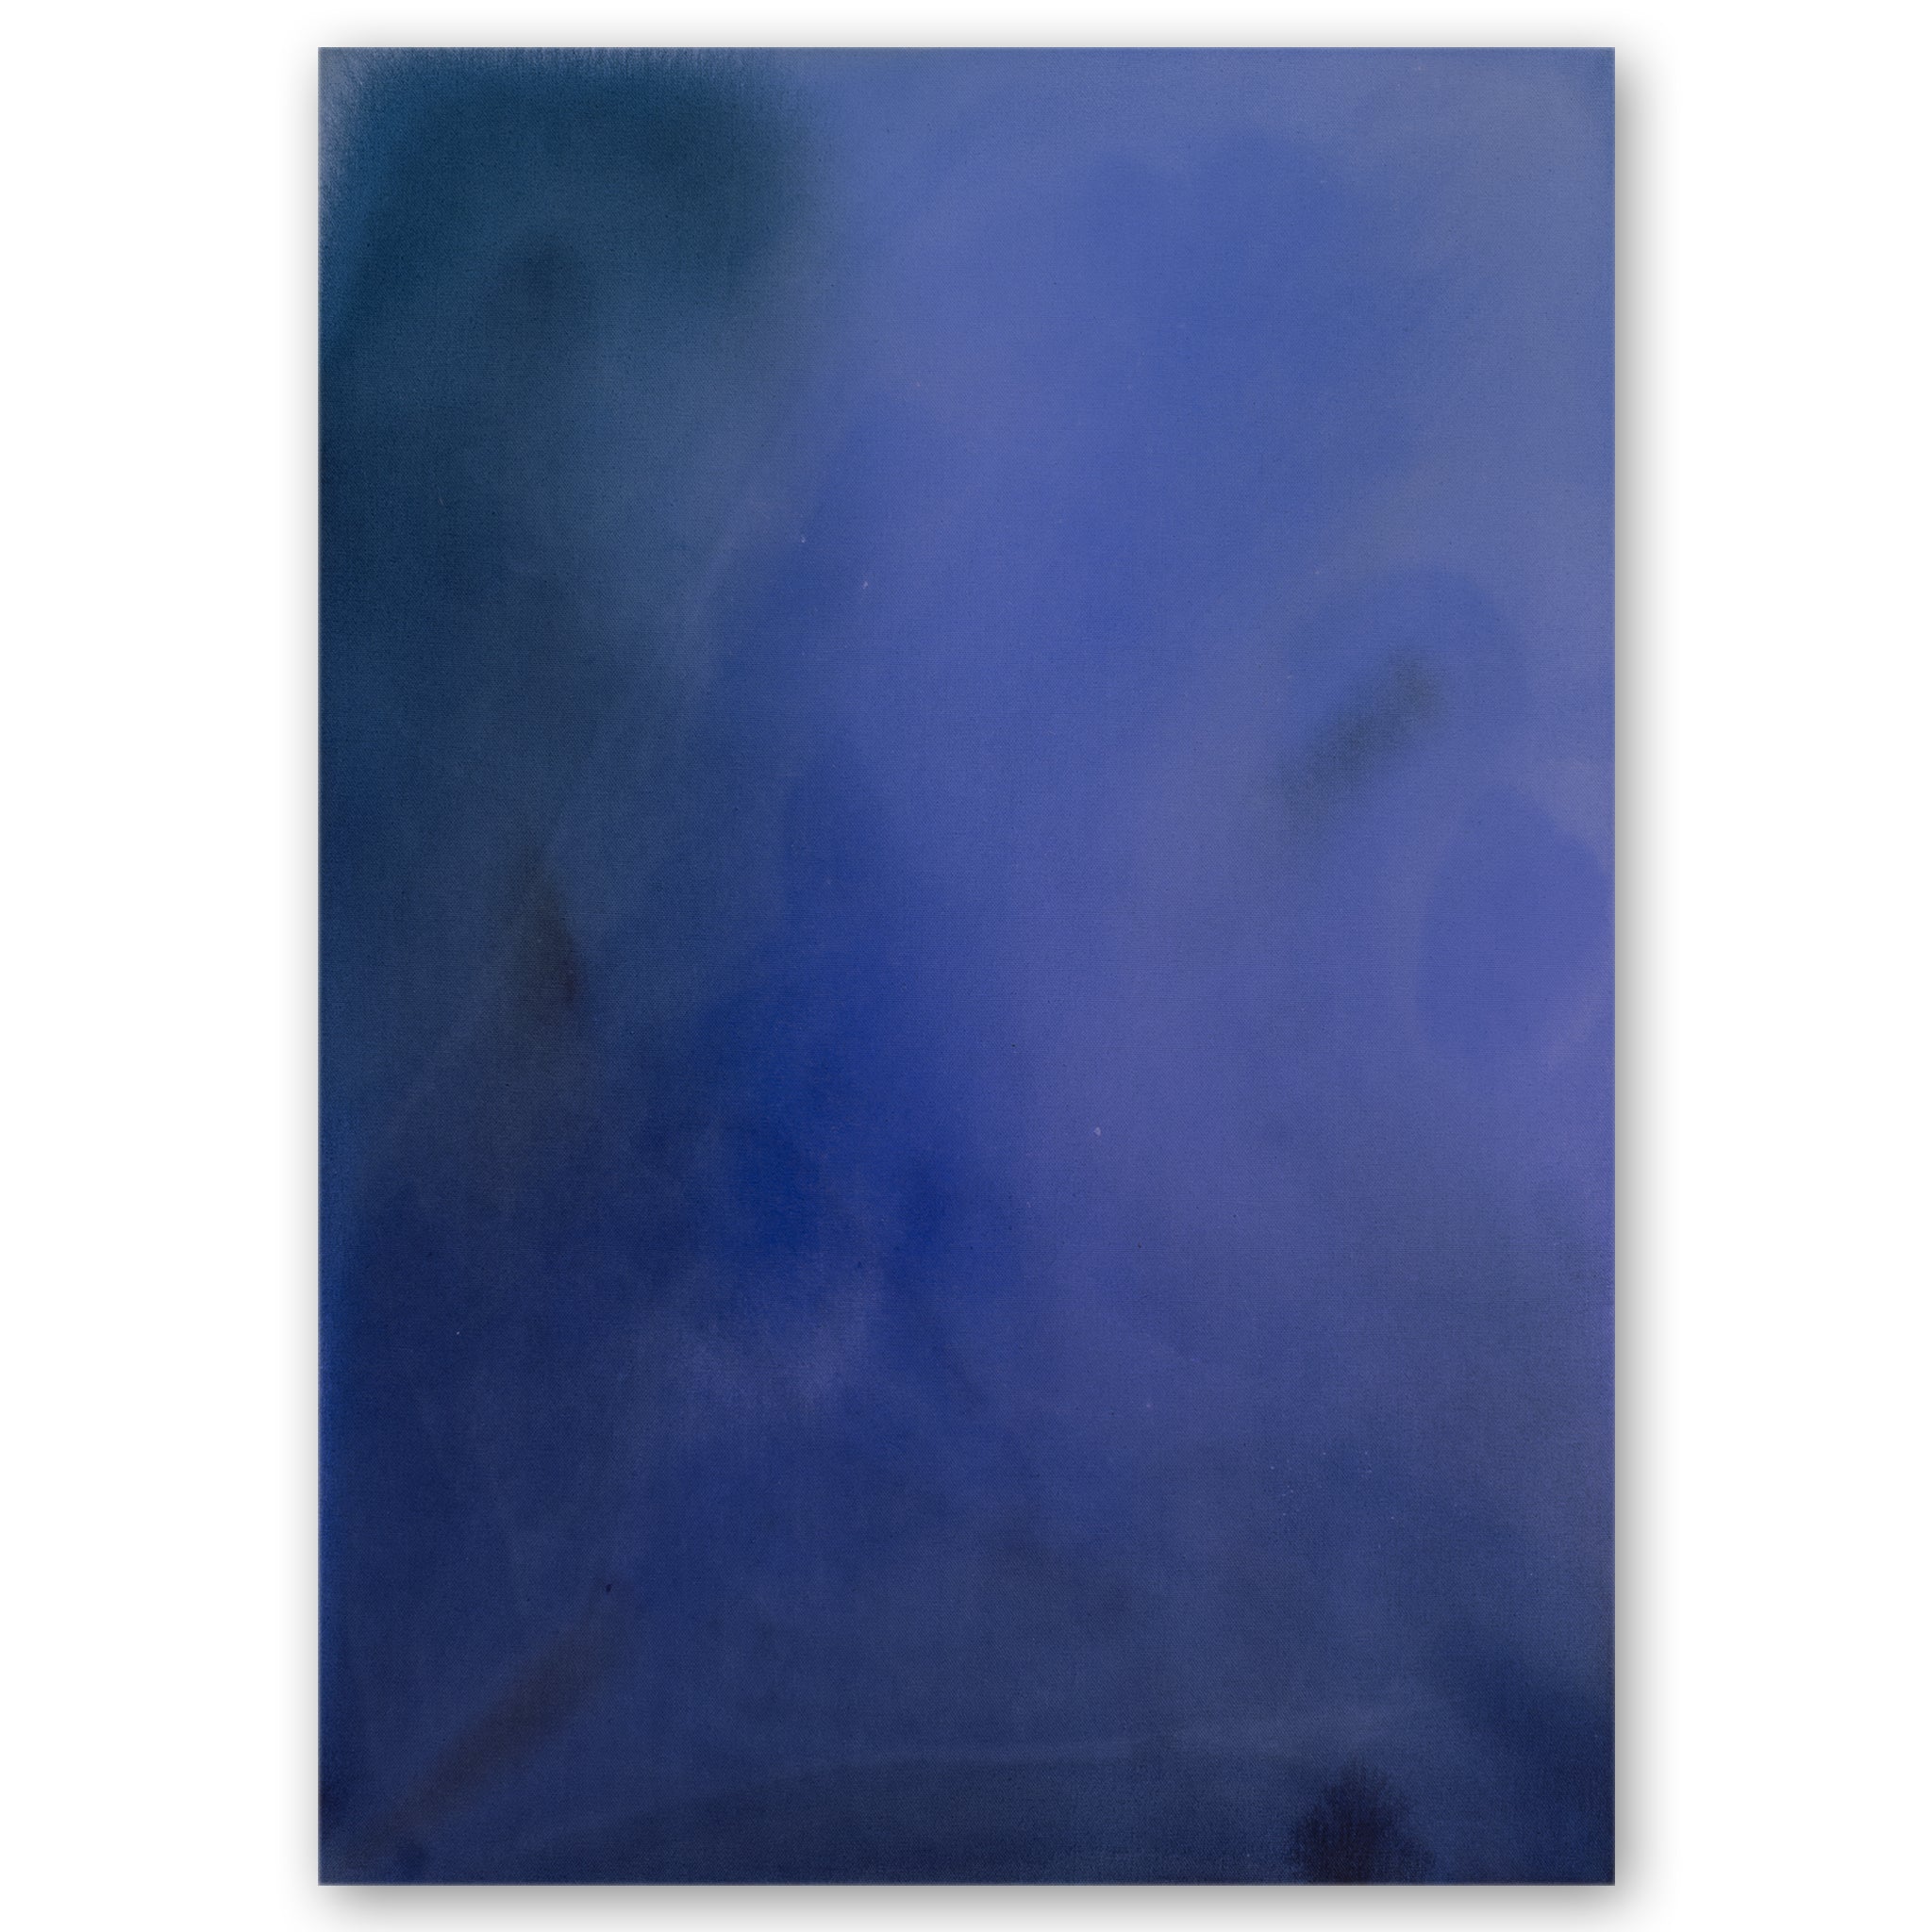 A cool blue abstract painting 